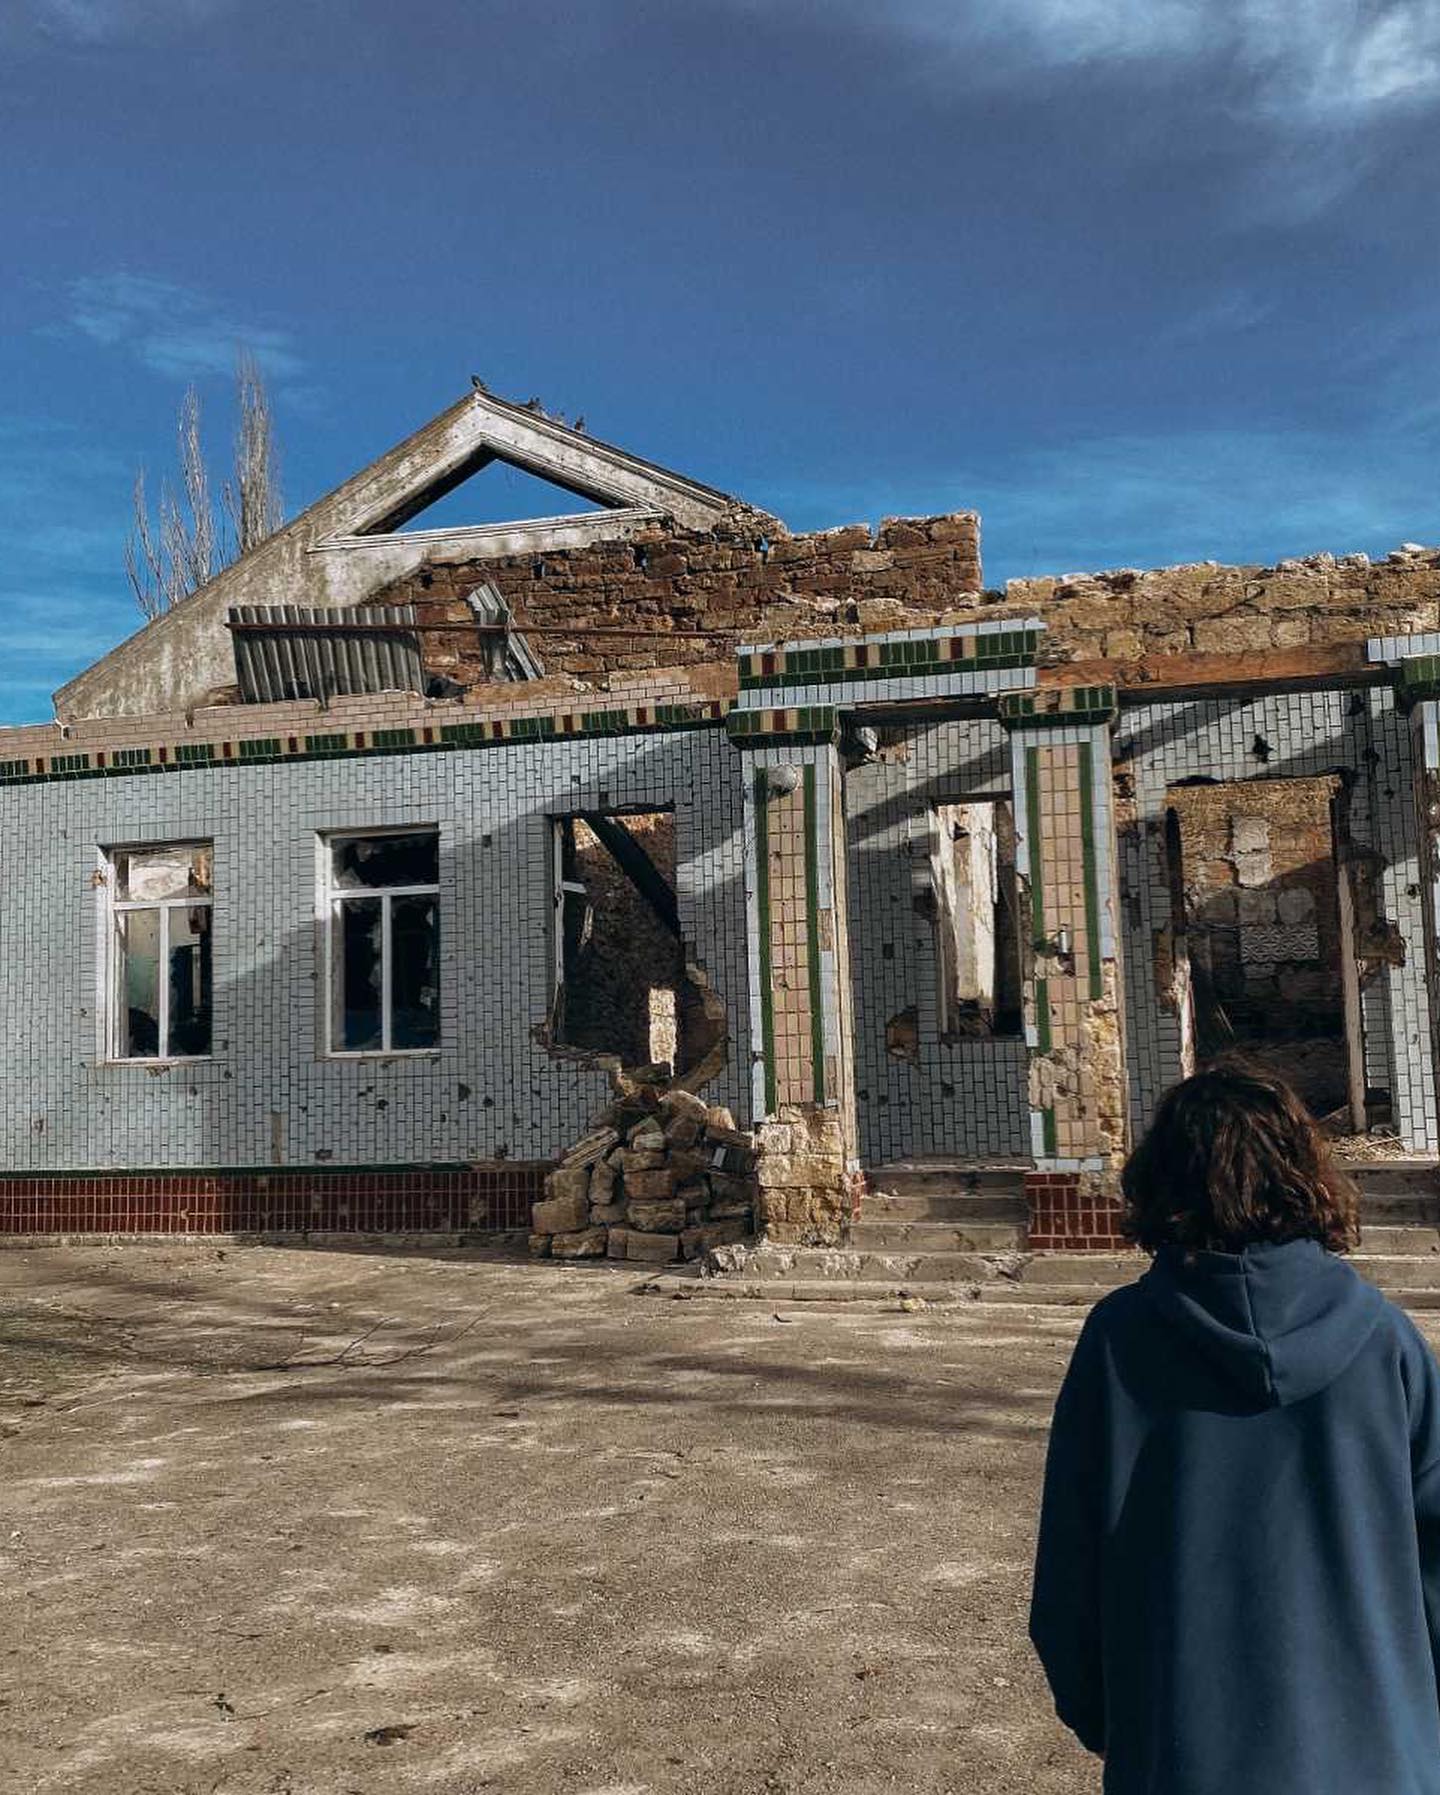 A man is standing in front of a building that has been destroyed.